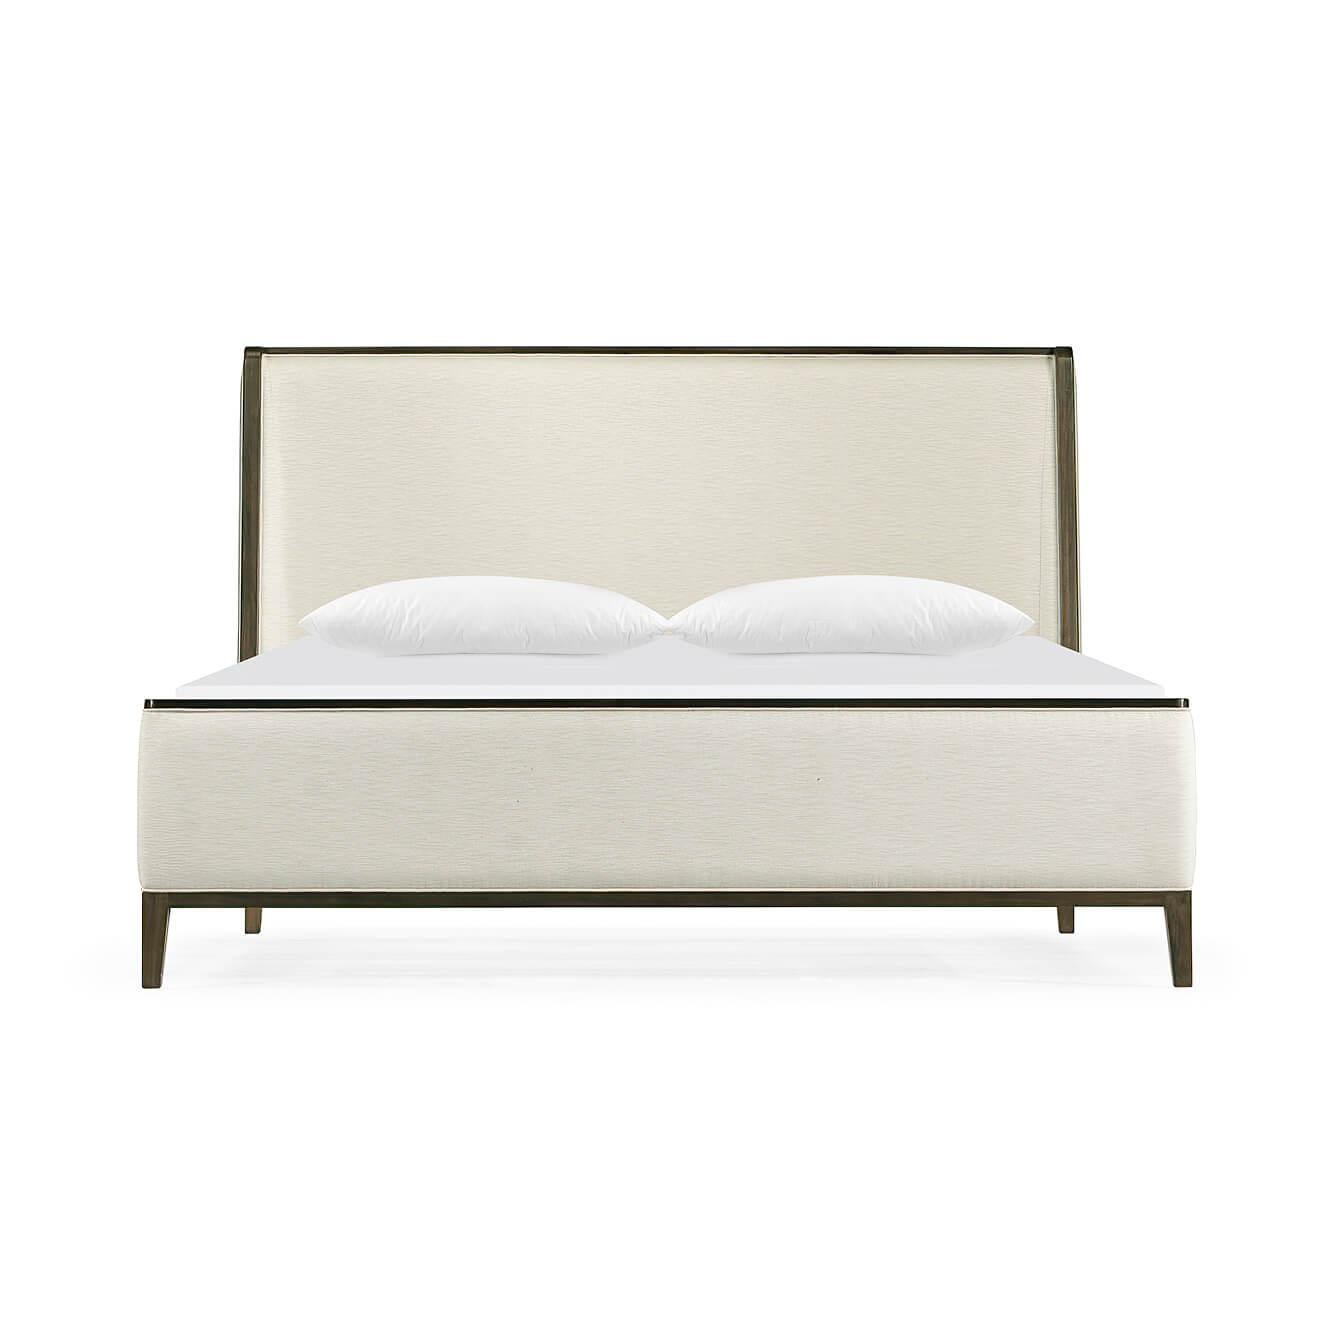 A modern upholstered king size bed with a hand rubbed Acacia frame, a winged back headboard, and raised on out flaring square tapered legs.

Dimensions: 81.75